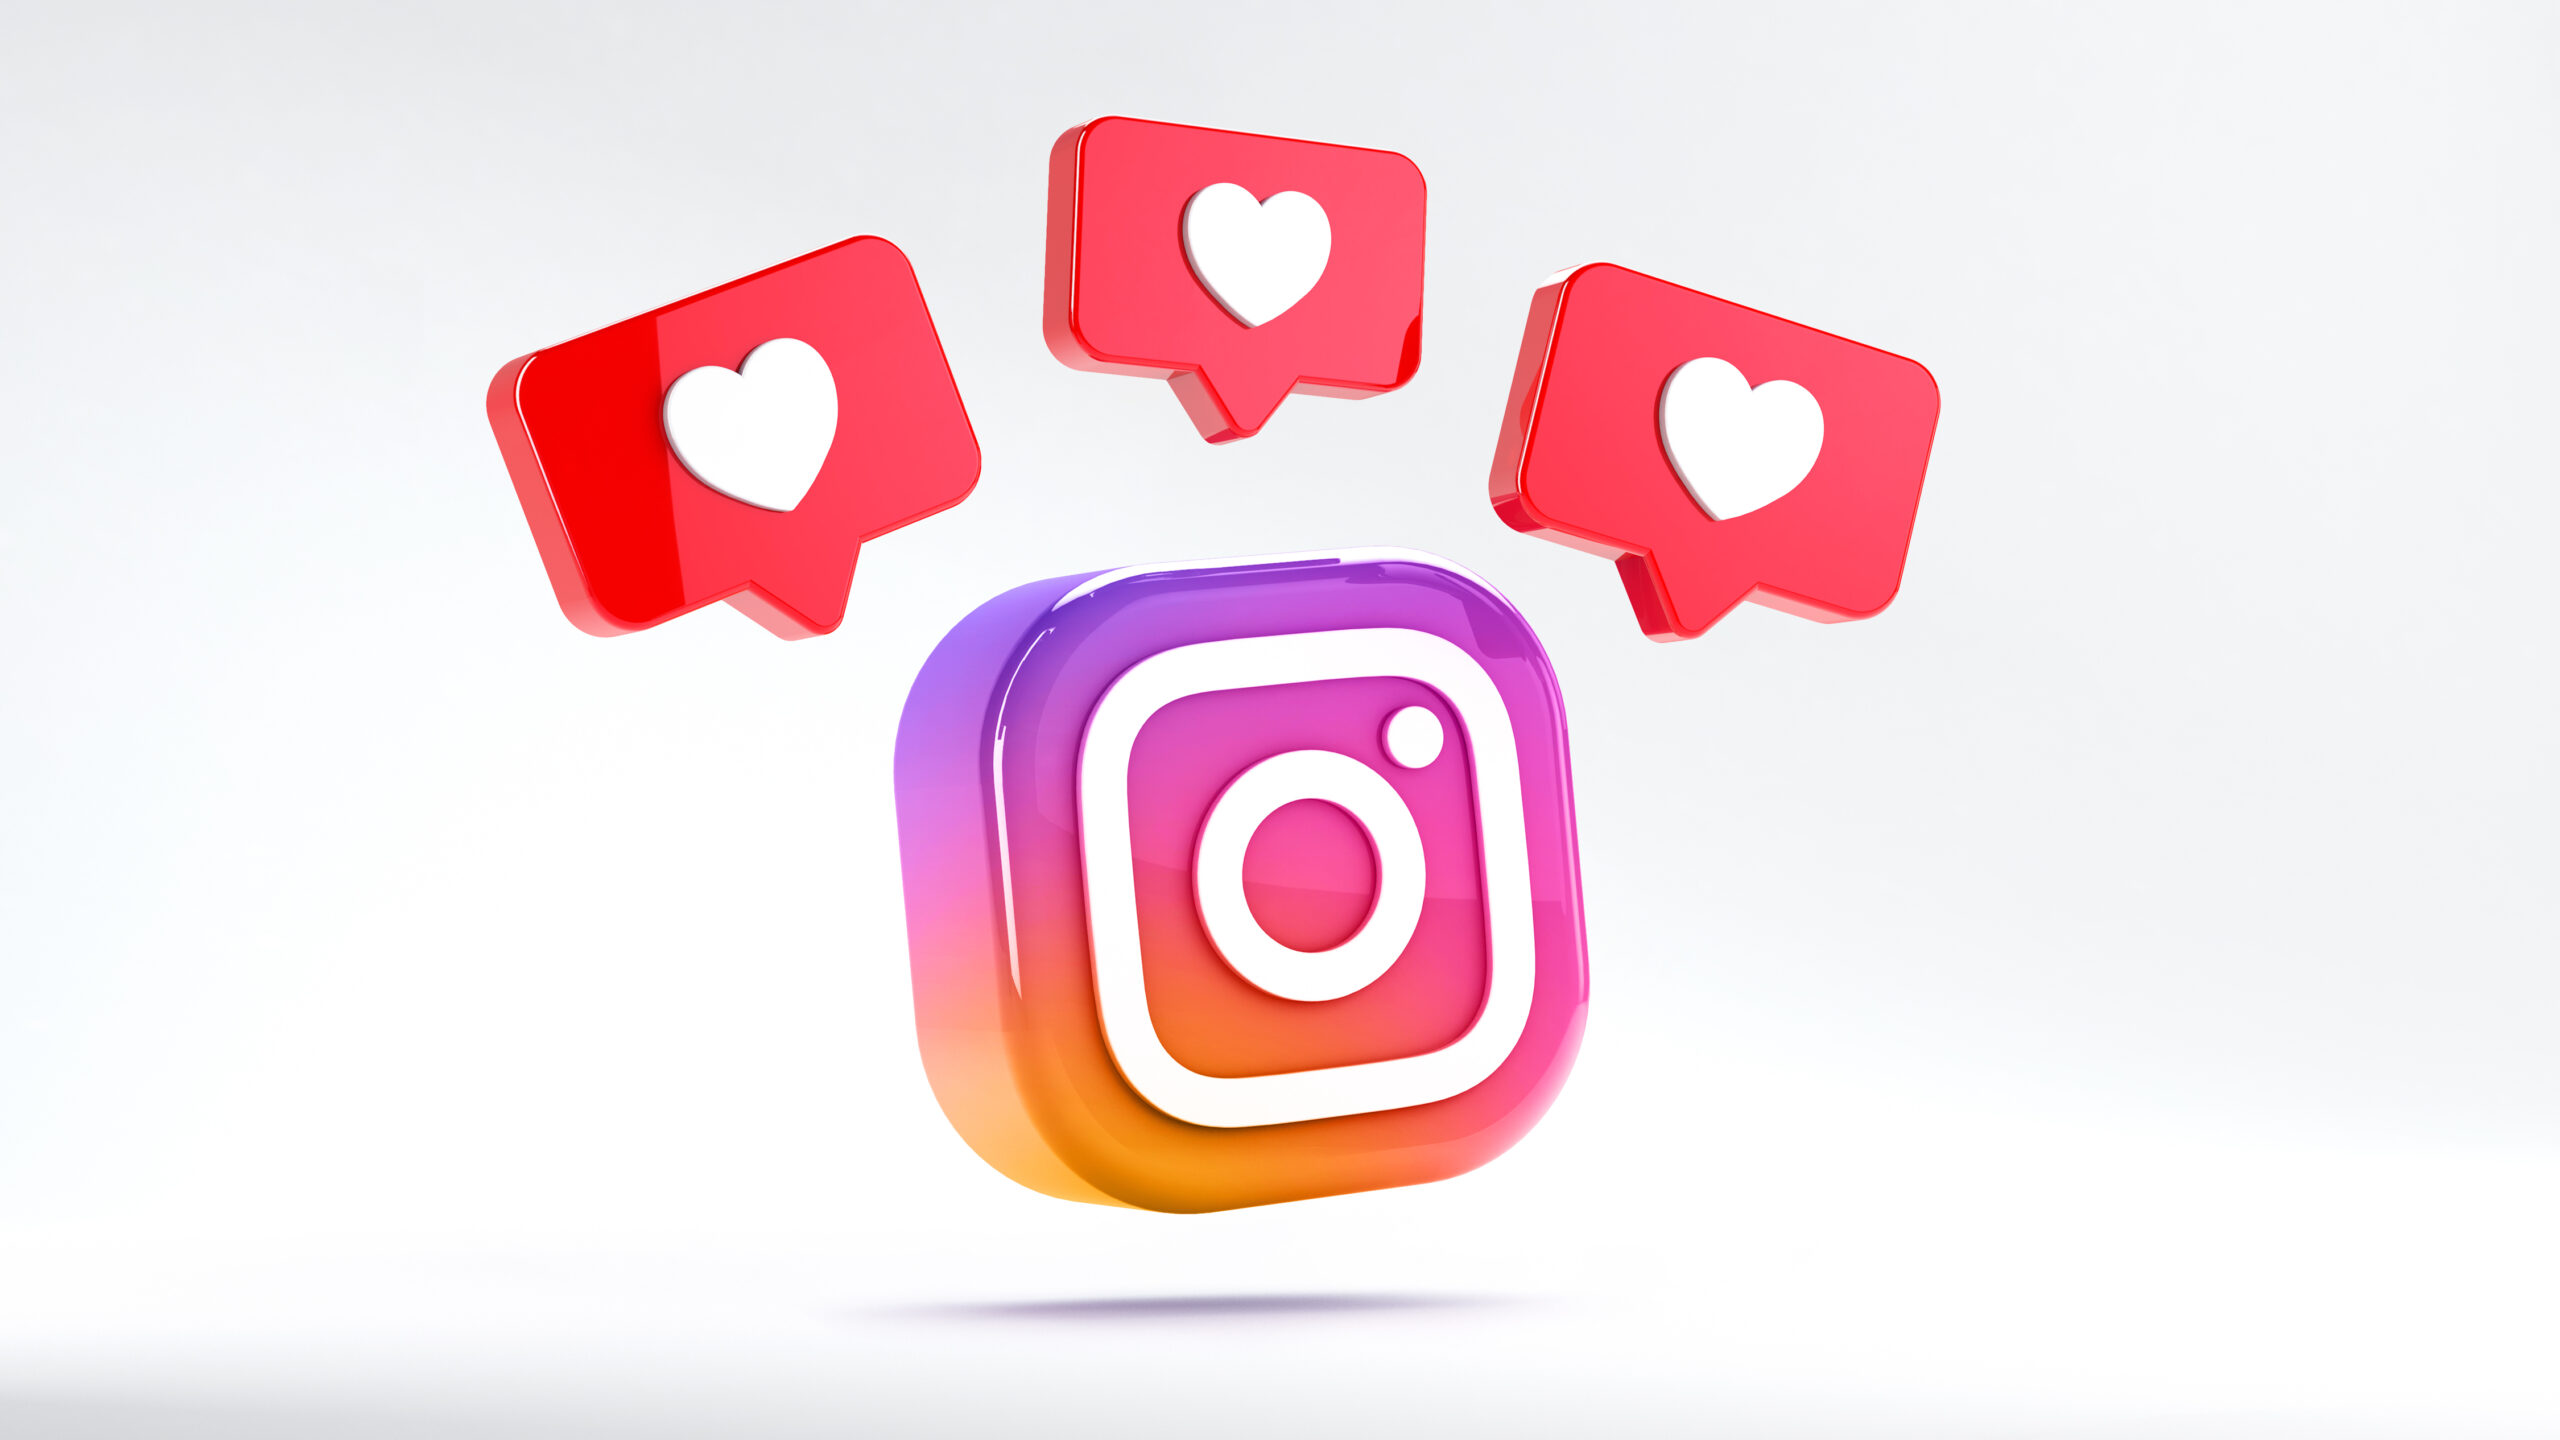 How do you get followers on Instagram? - KnowProz